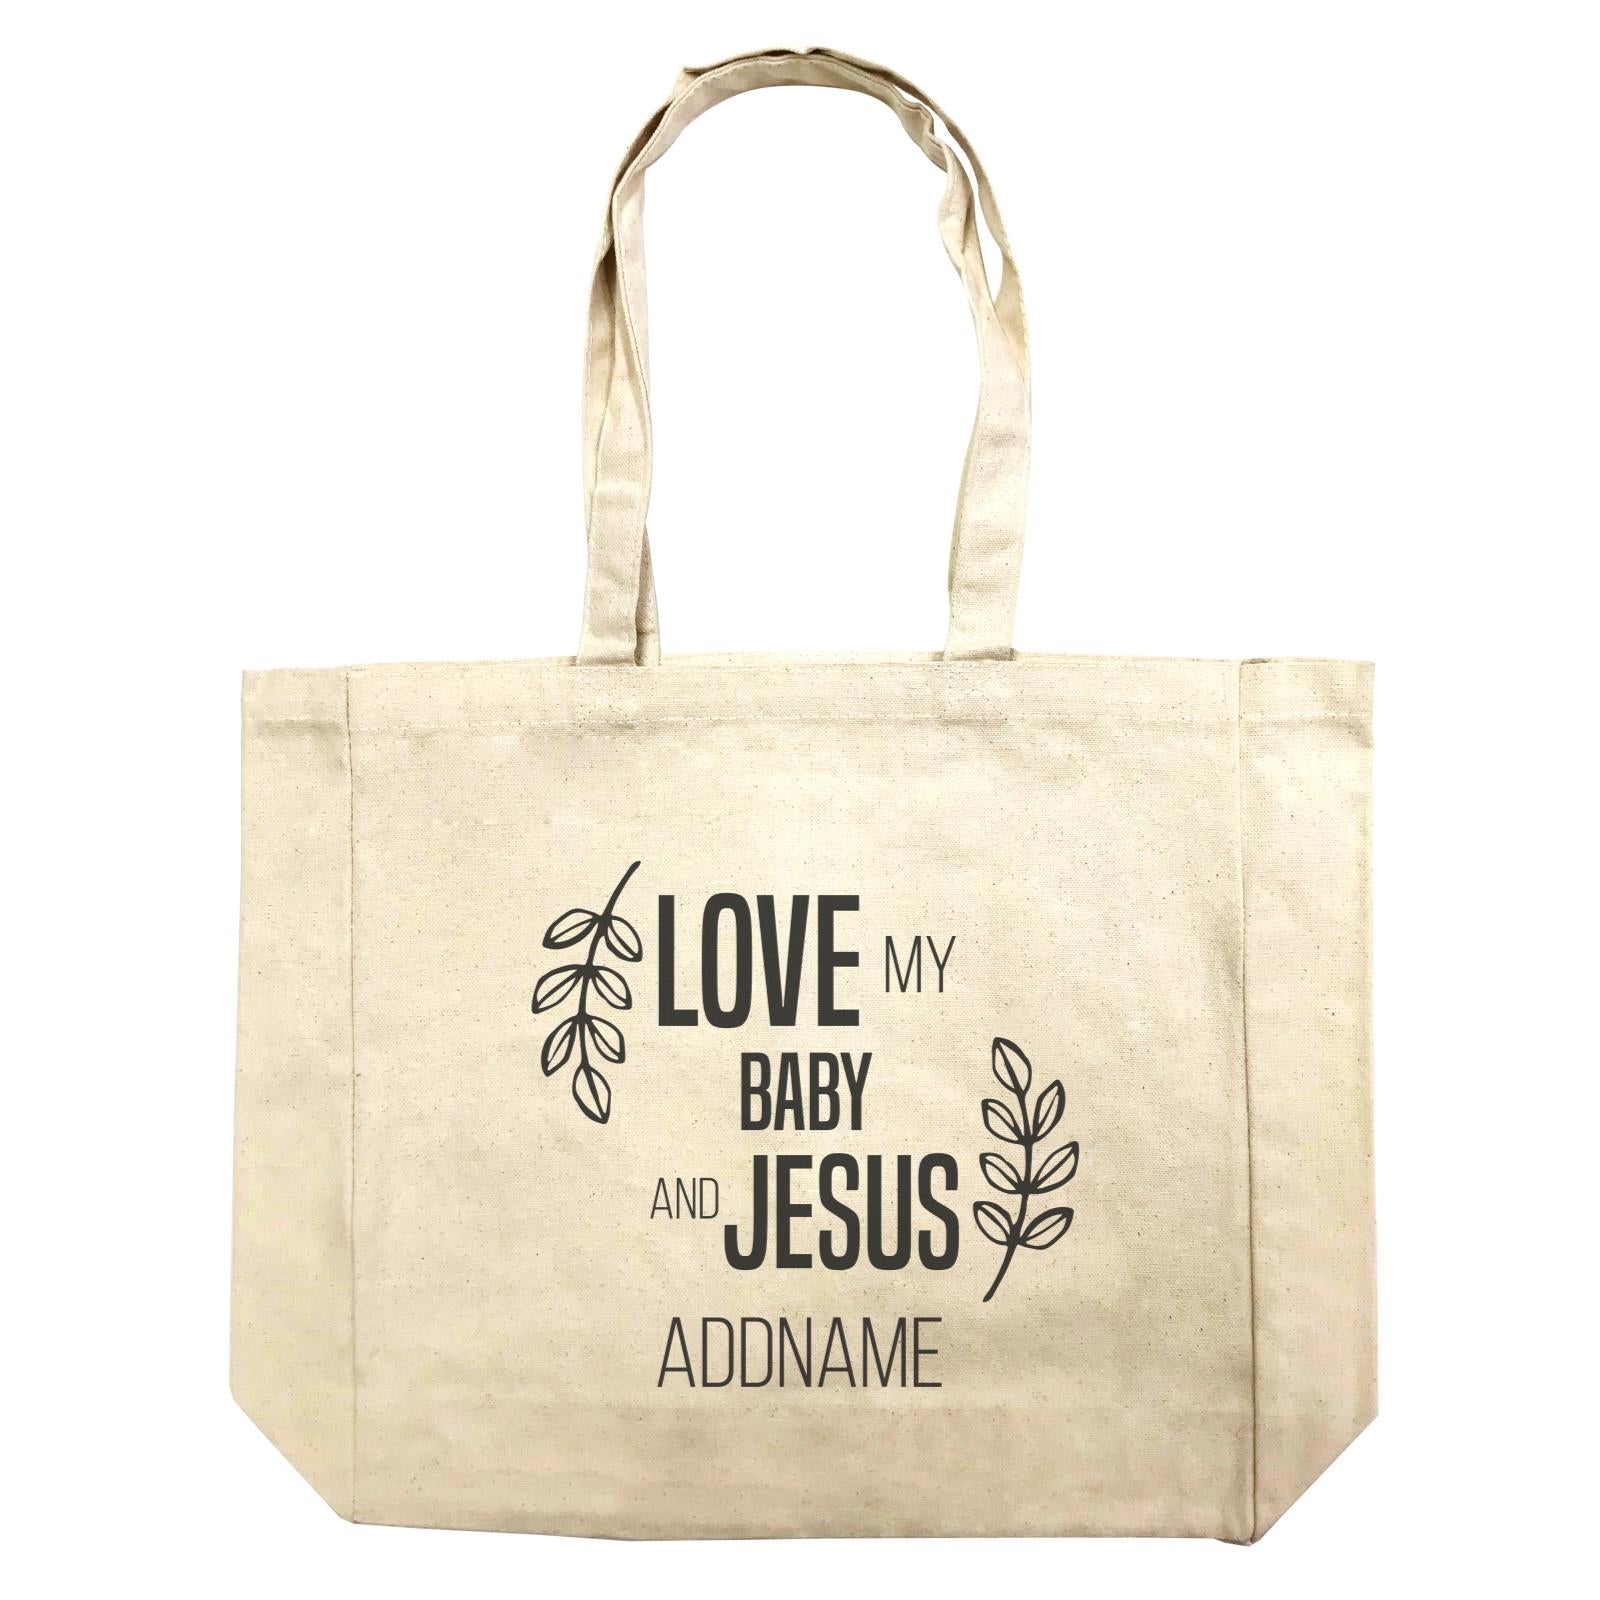 Christian Series Love My Baby And Jesus Addname Shopping Bag